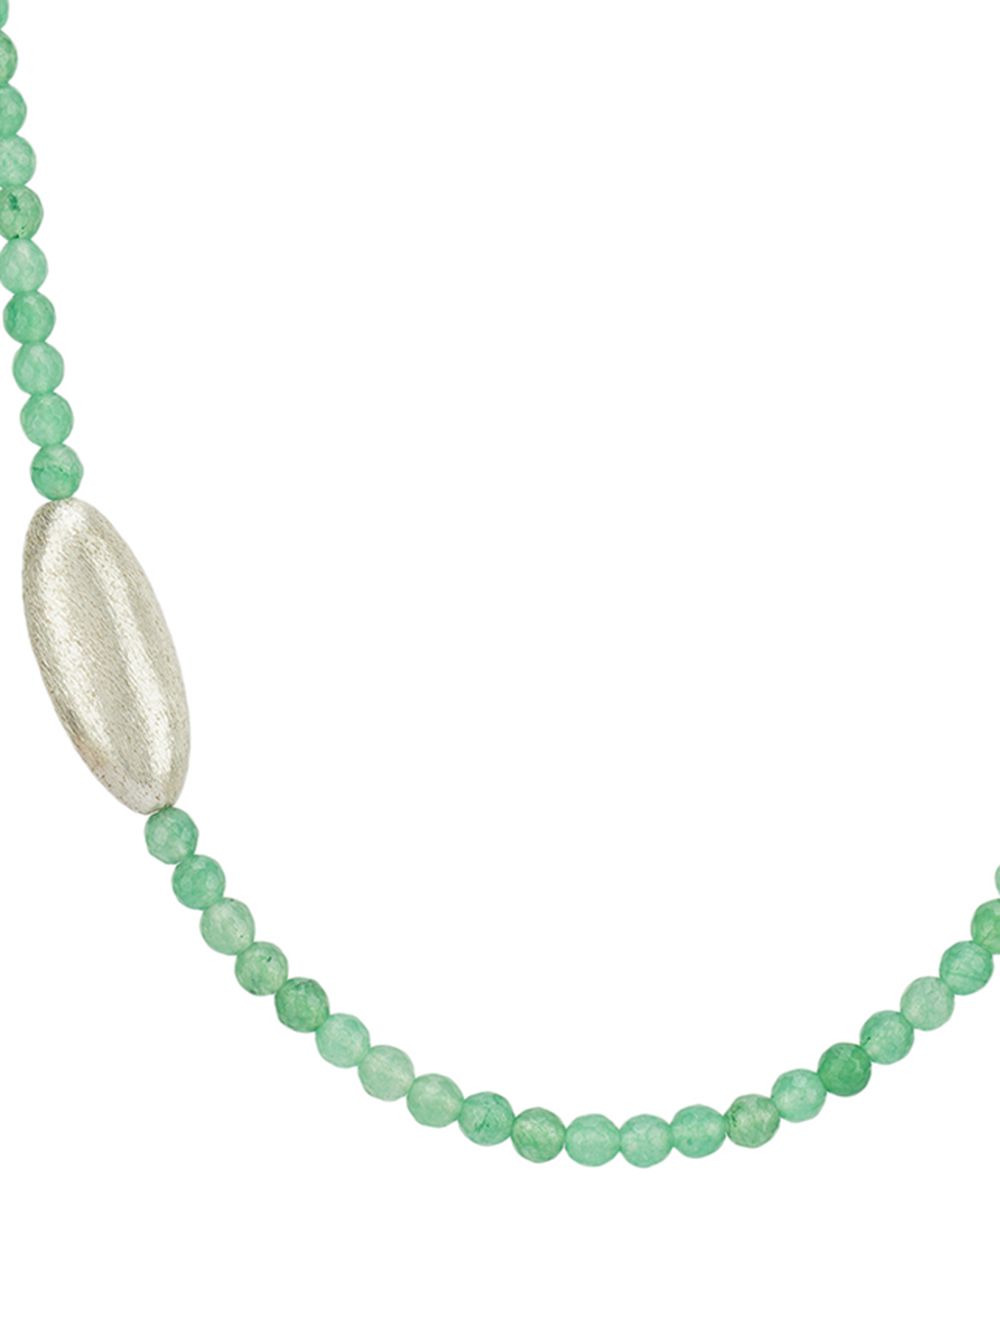 Green  Handcrafted  Matte Beaded Necklace